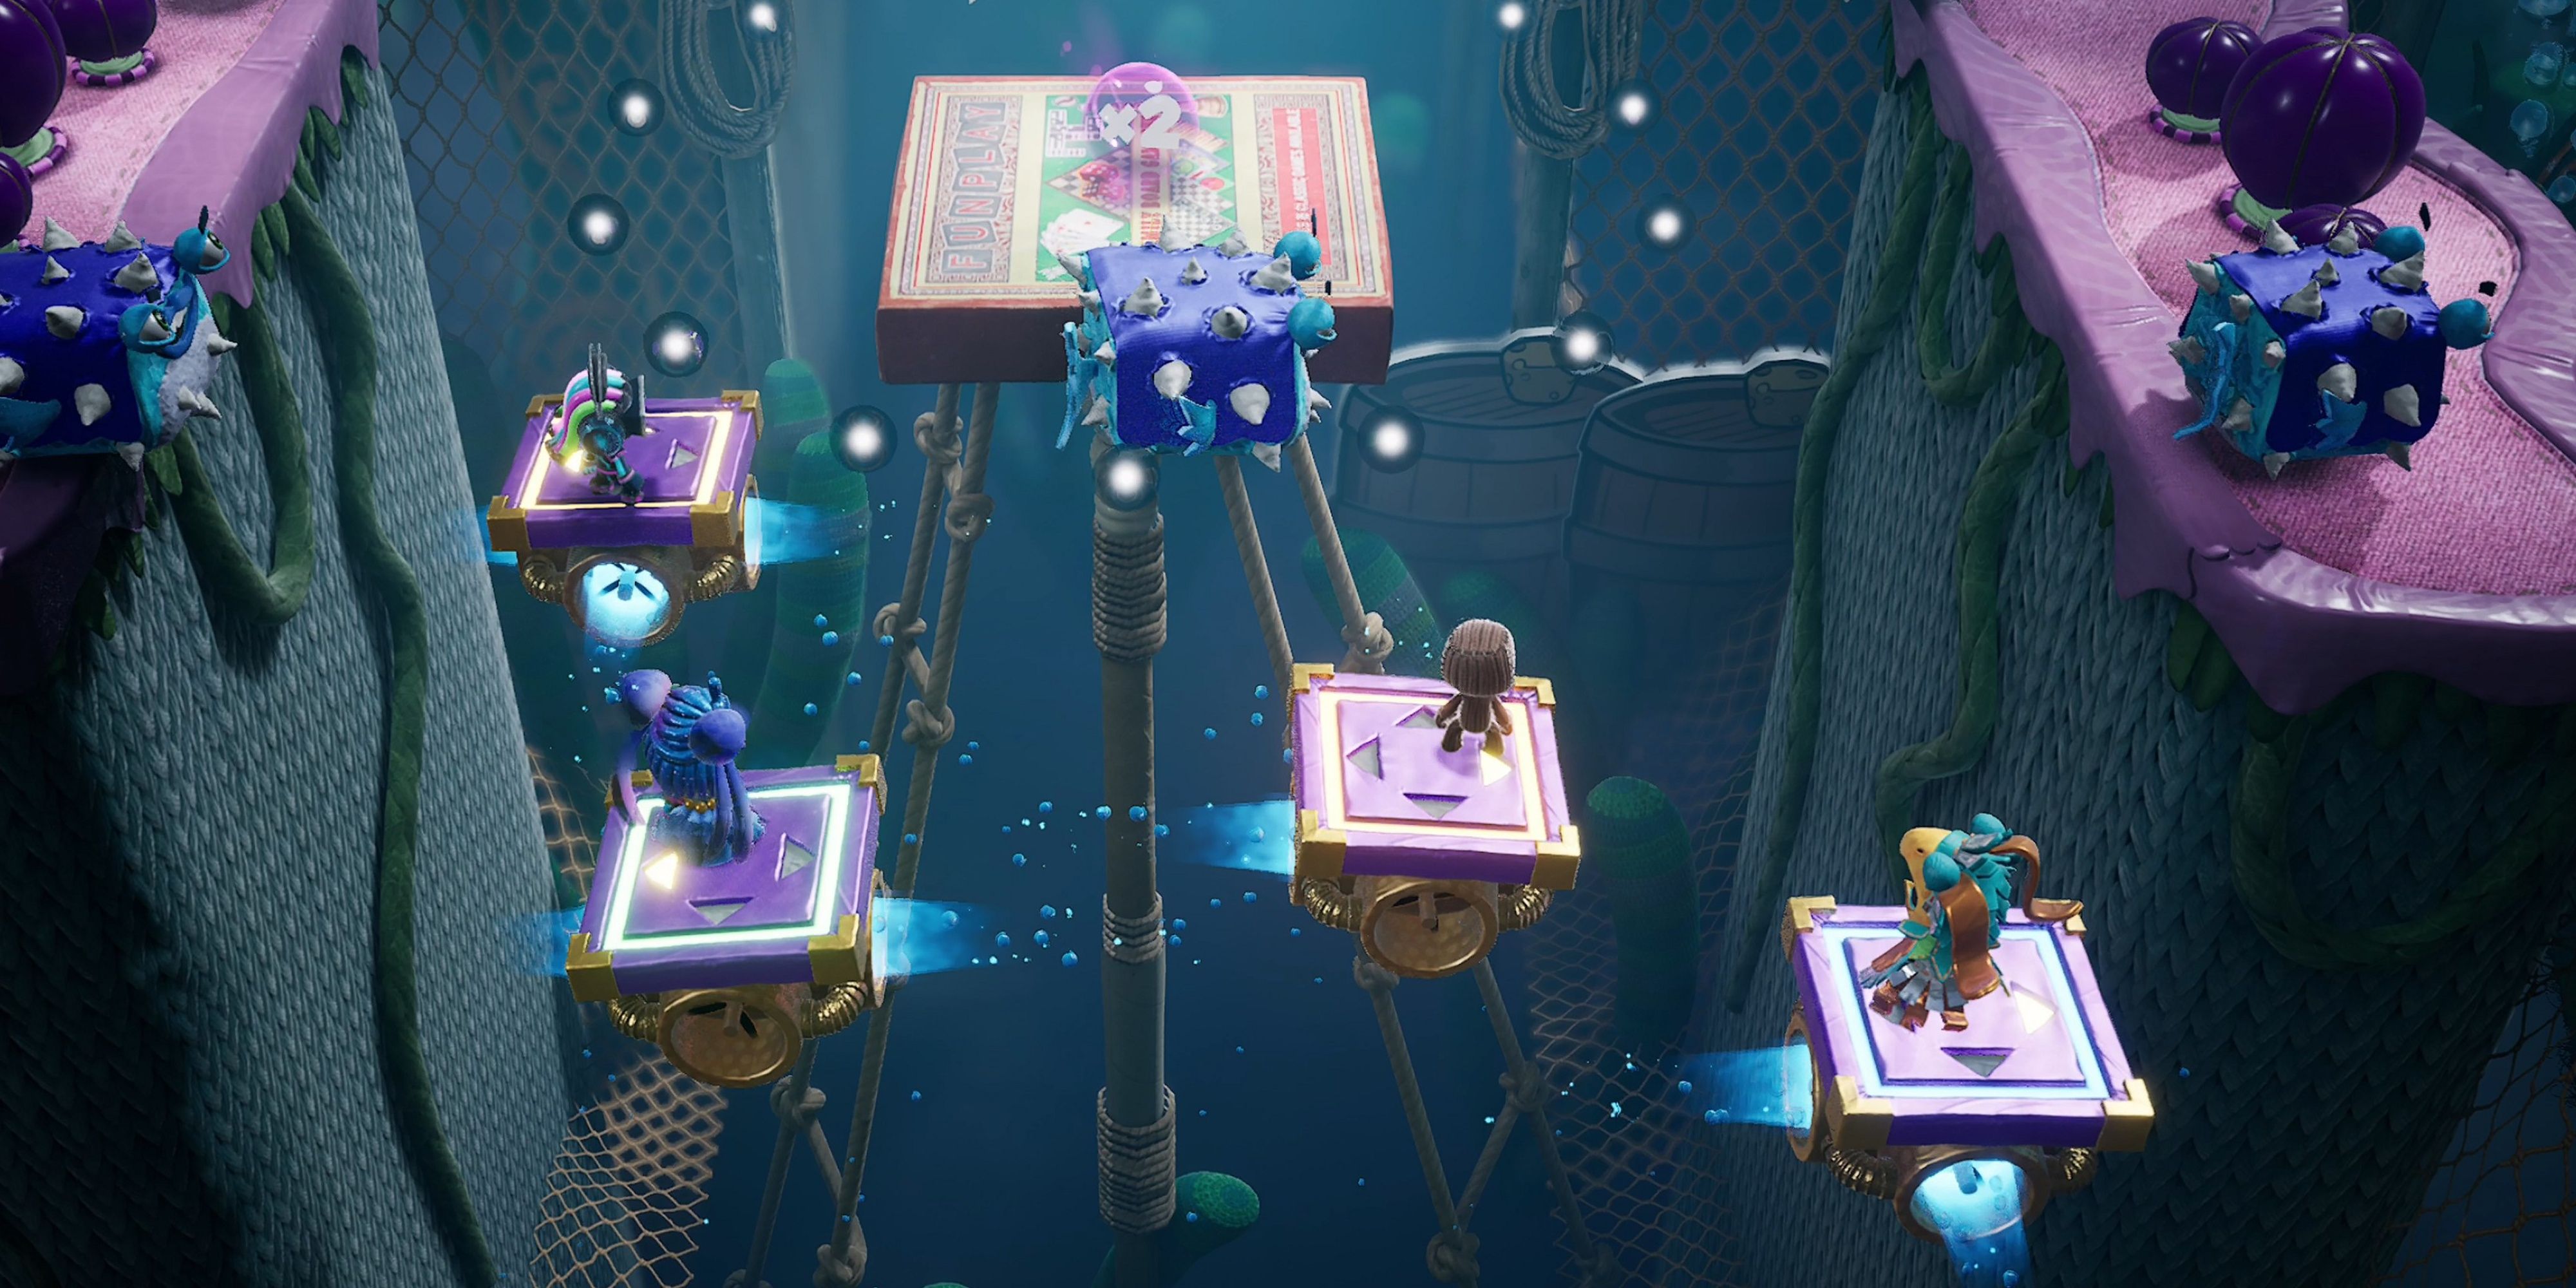 Several sackboy characters on moving platforms